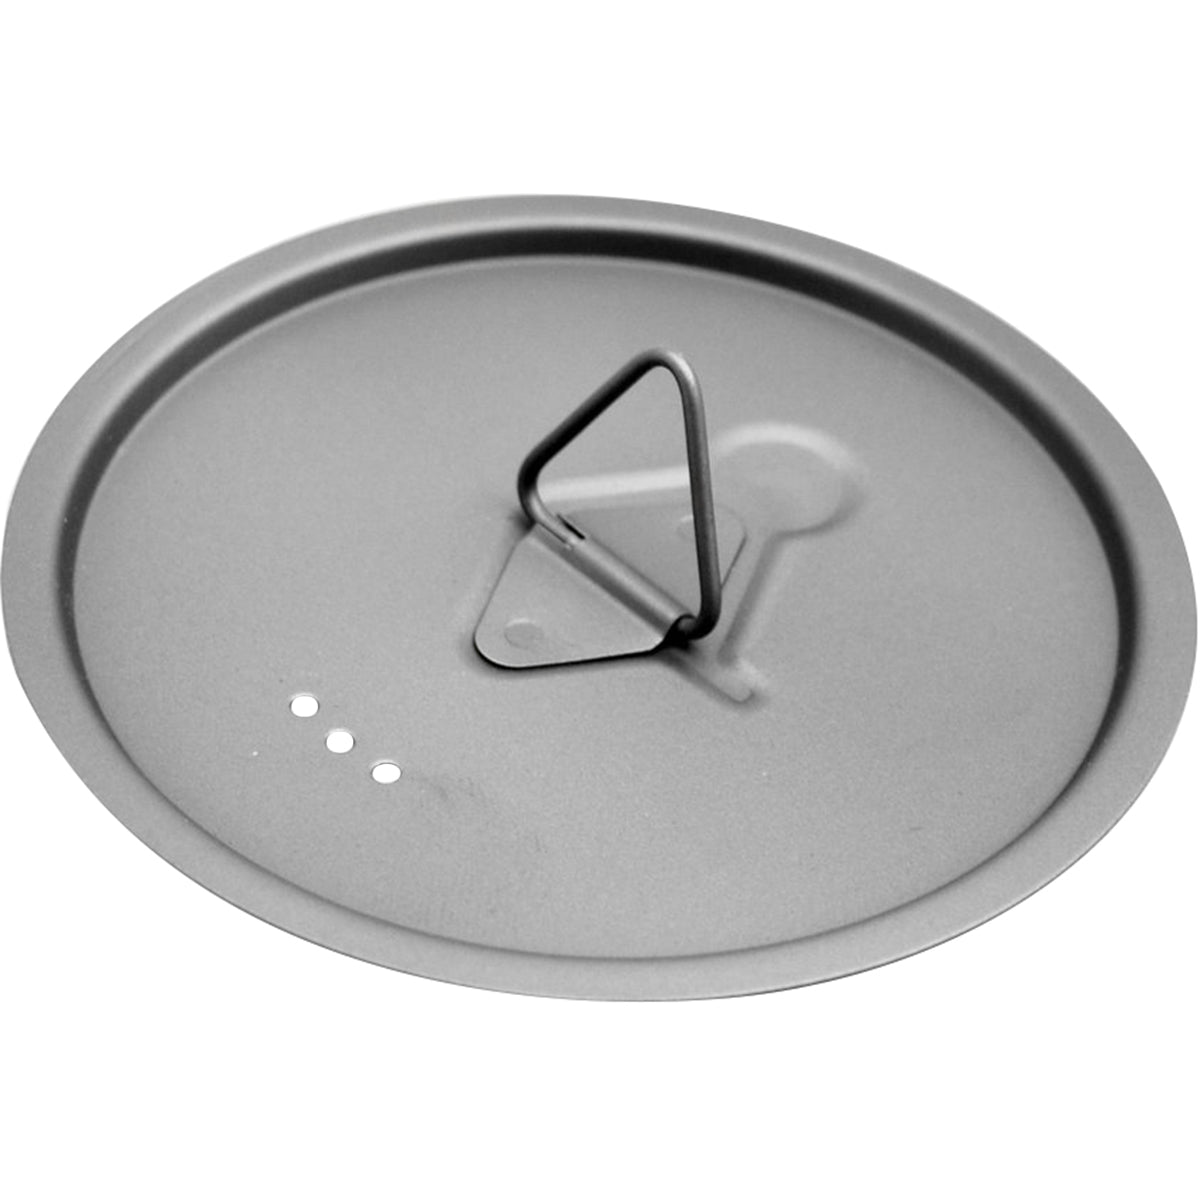 TOAKS Updated Titanium Lid for Outdoor Camping Cook Pots and Cups - 95mm TOAKS